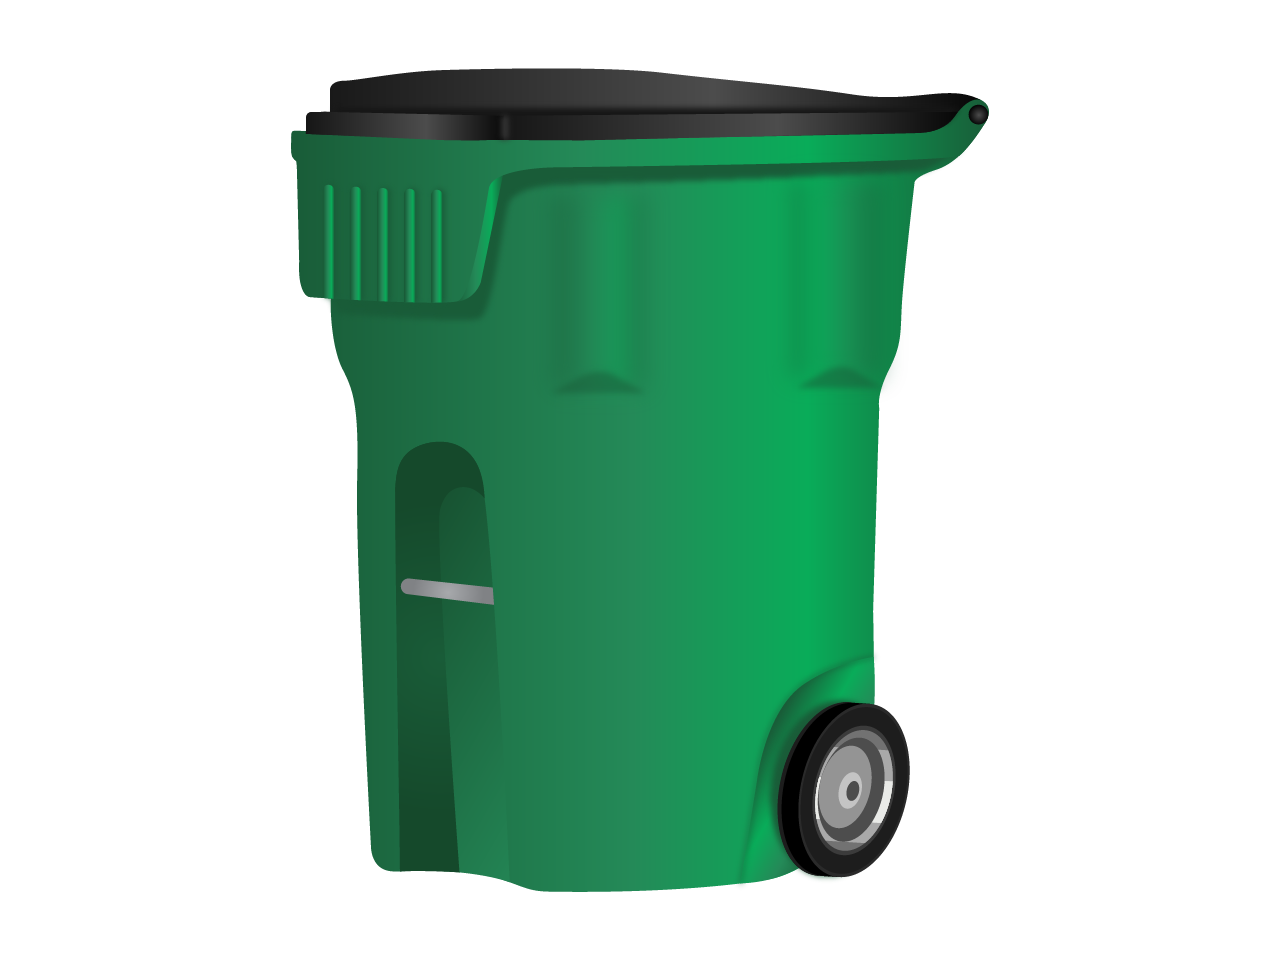 #11478 - Curbside Trash Can Illustrations_green_without logo